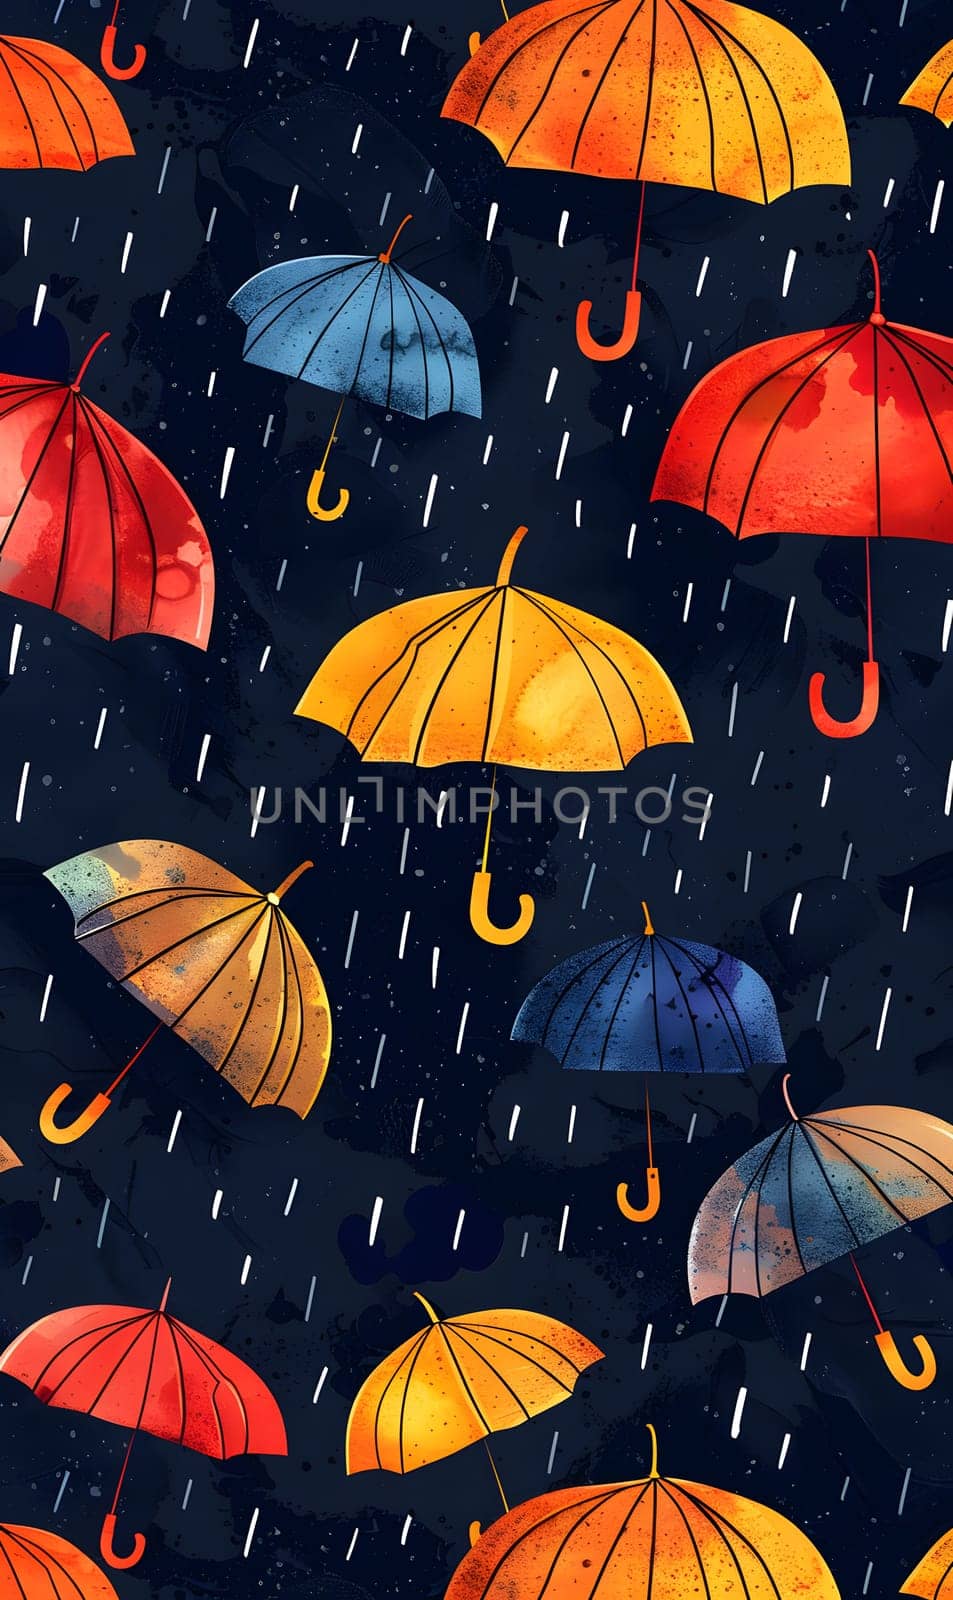 Electric blue, orange, and black umbrellas form a seamless pattern in the rain by Nadtochiy